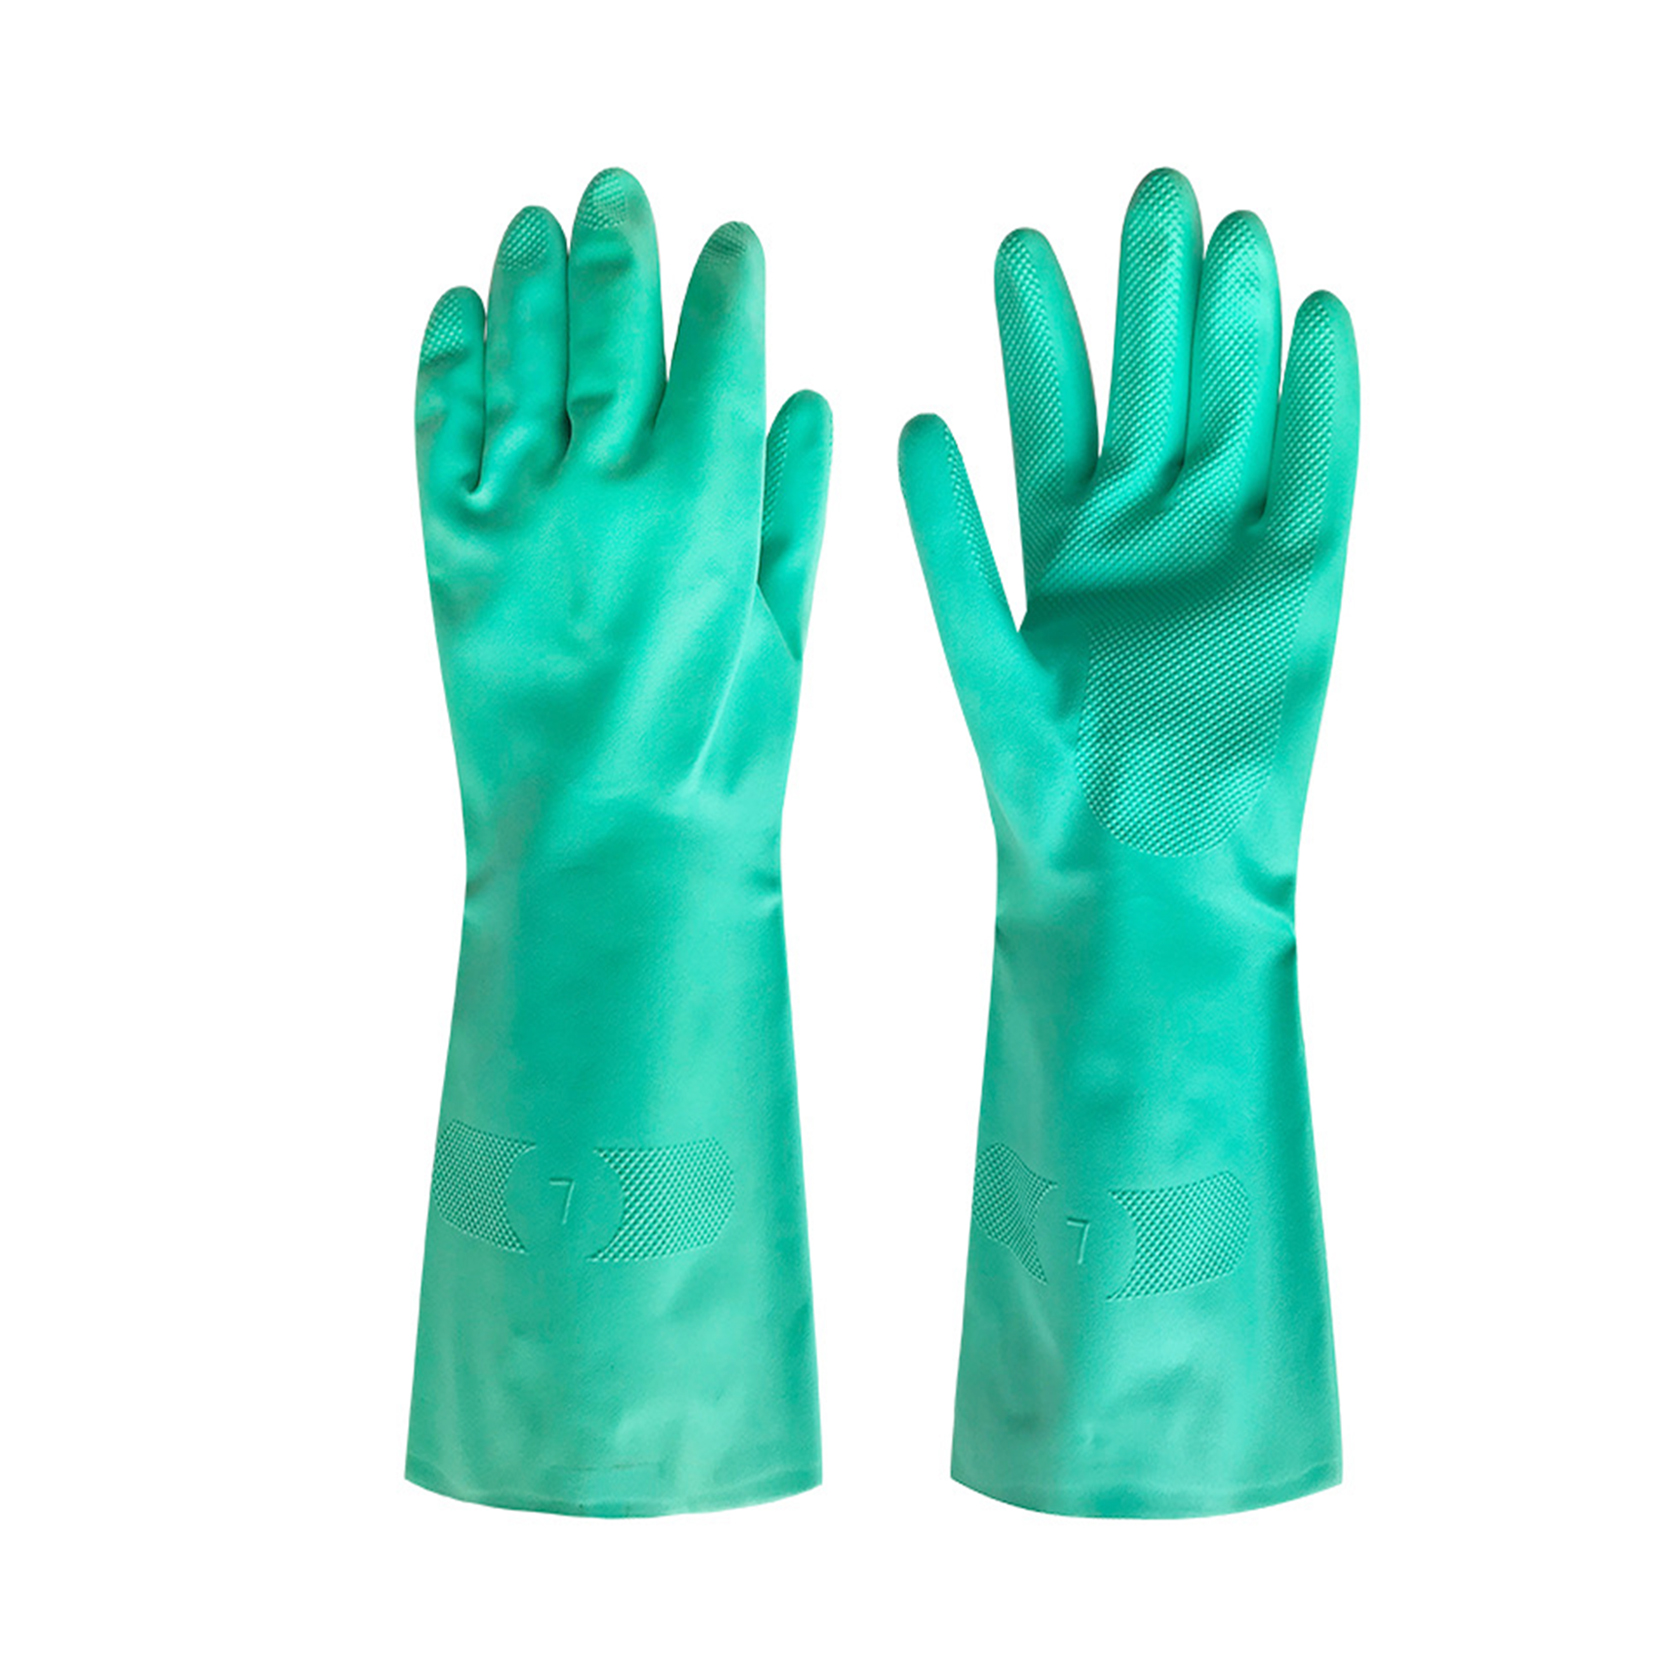 Nitrile Chemical Resistant Gloves, Reusable Heavy Duty Safety Work Gloves Without Li (1)